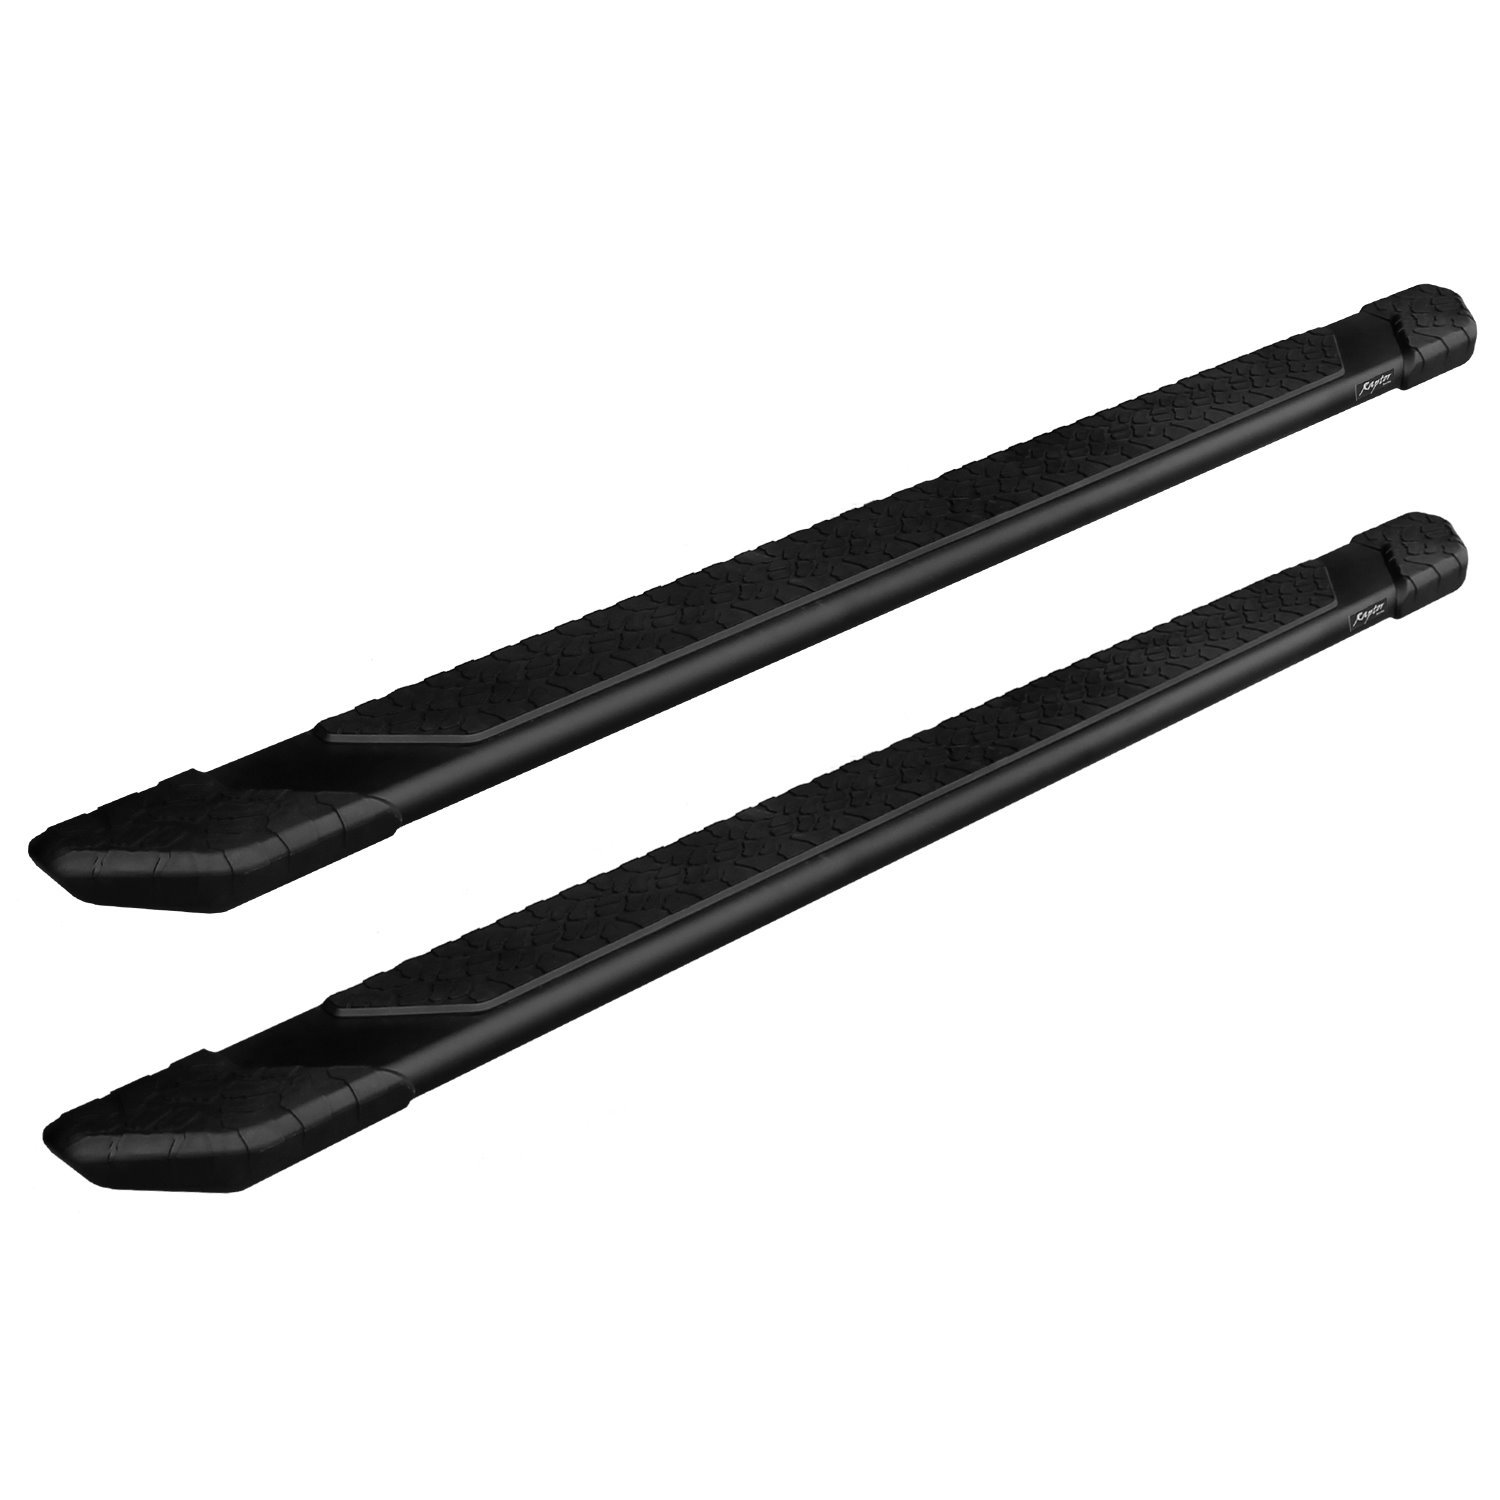 1904-0142BT 5 in Tread Step Slide Track Running Boards, Black Aluminum, Fits Select Toyota Tundra CrewMax Cab